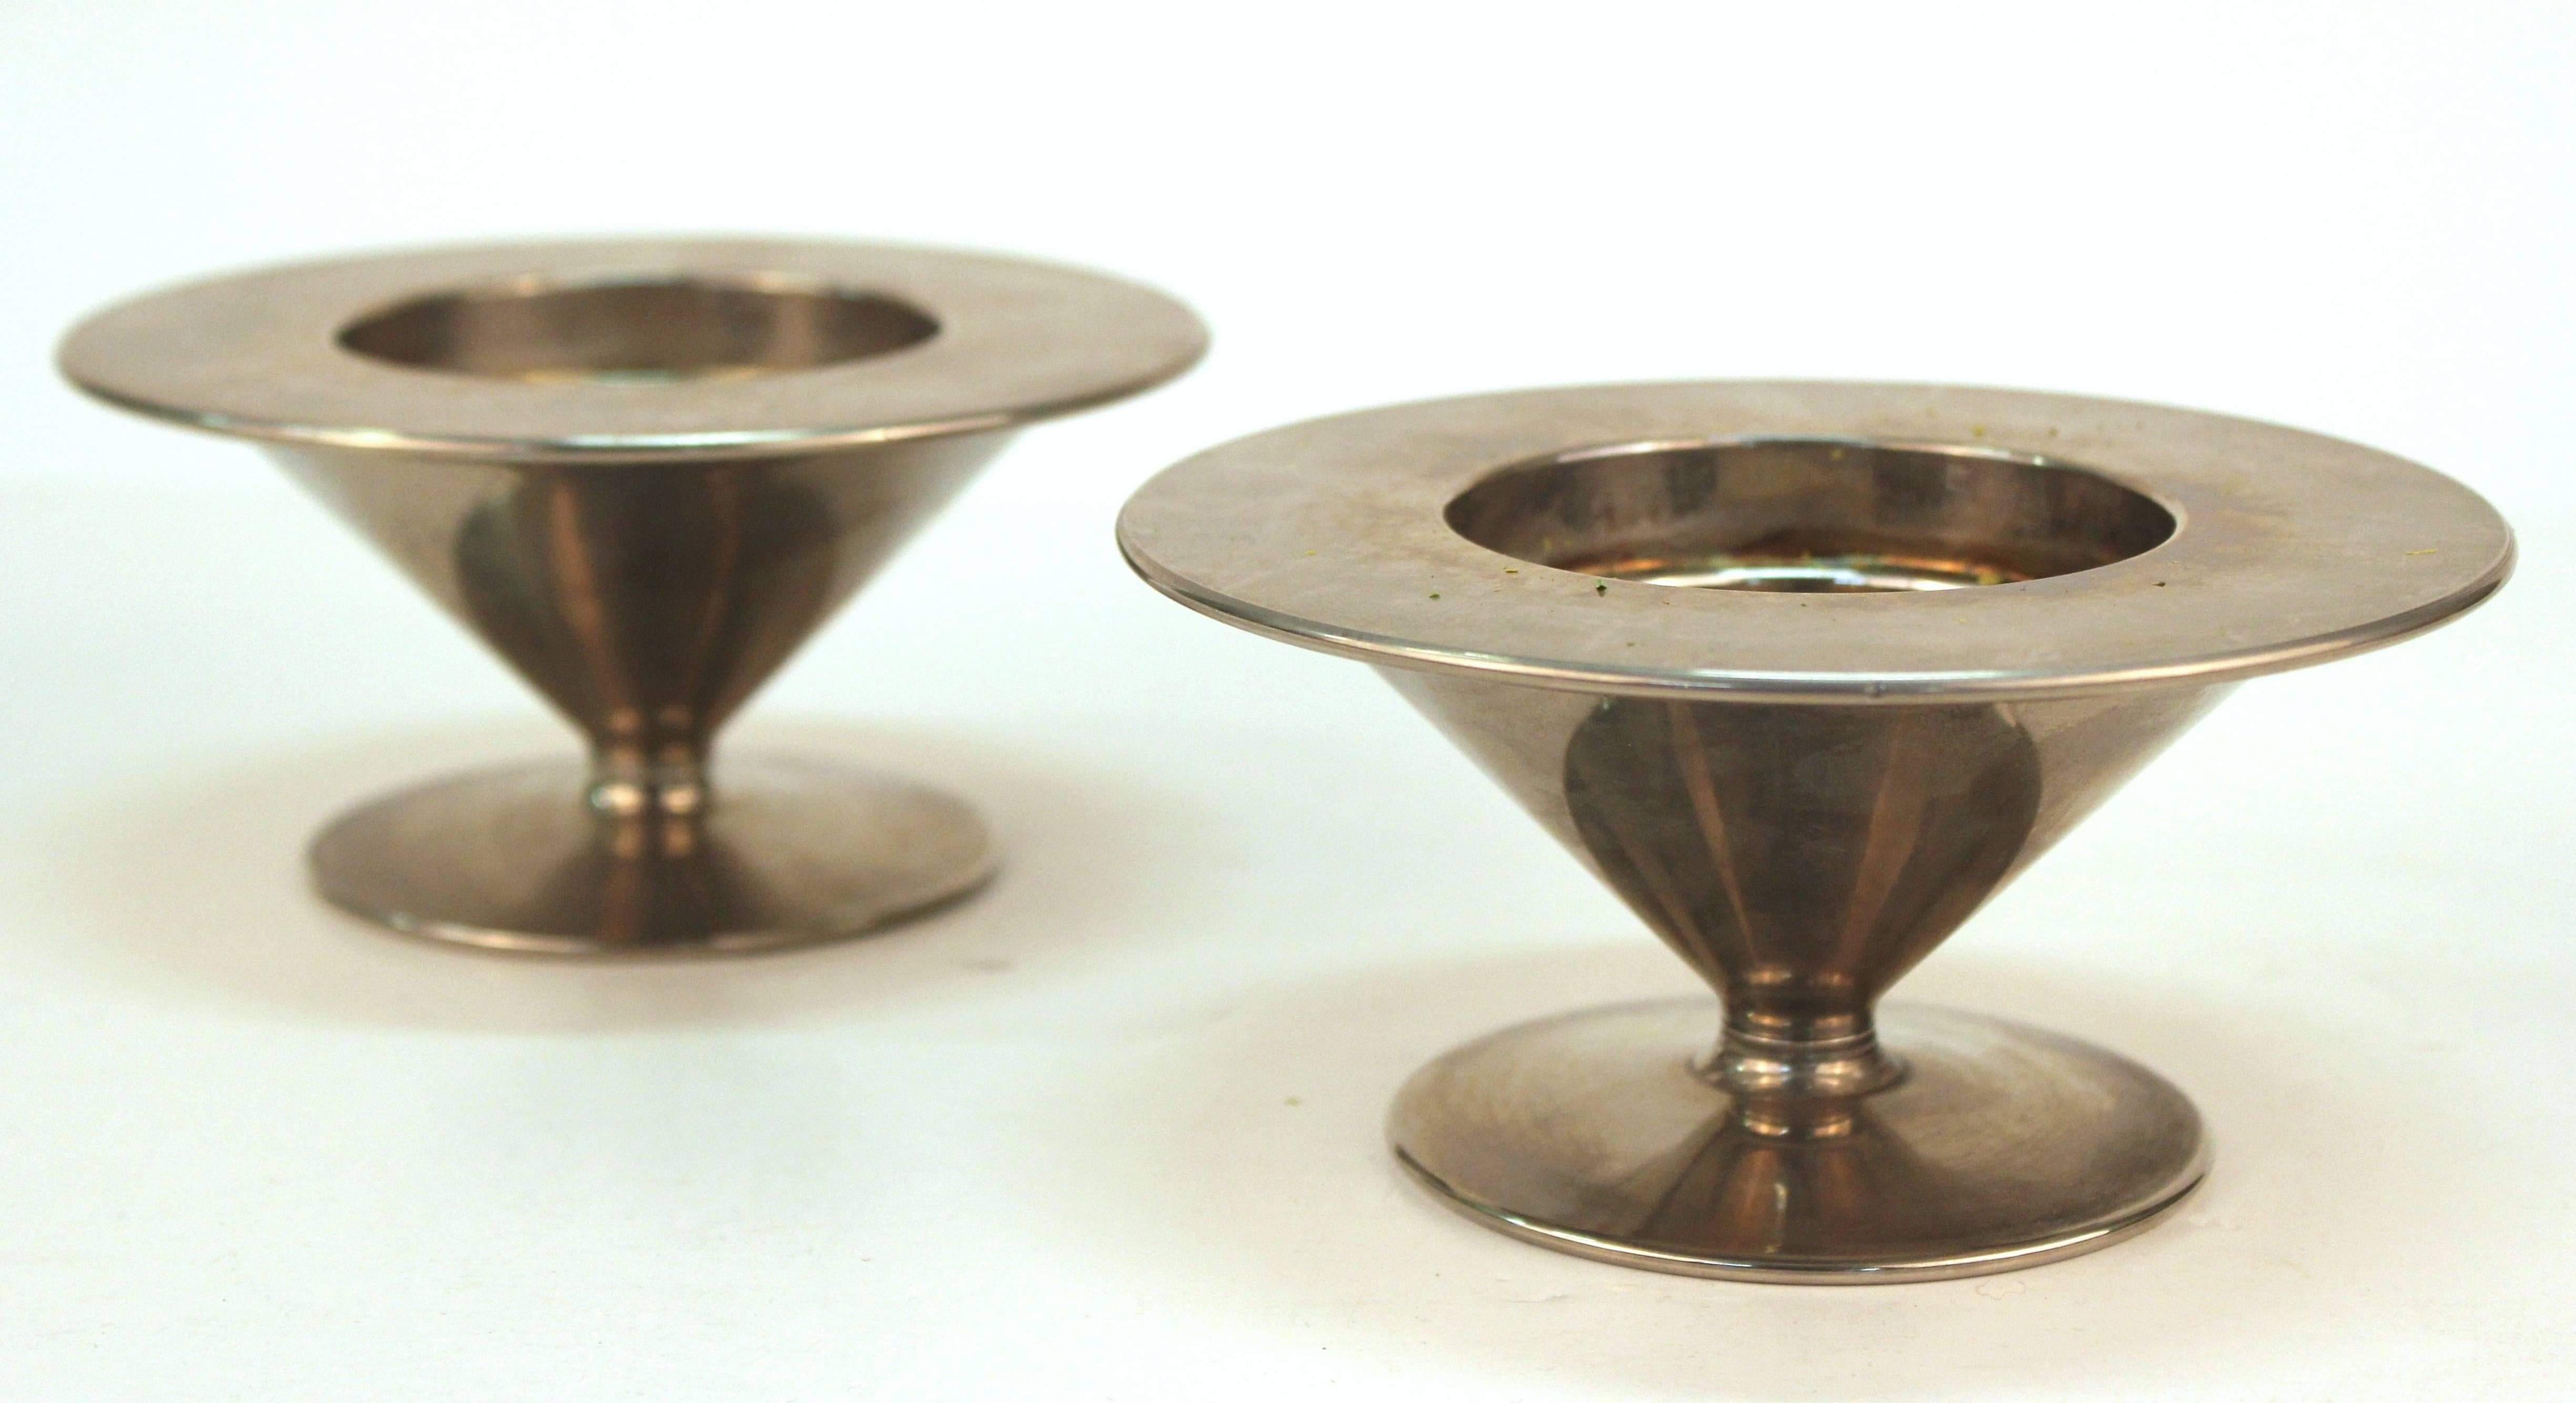 Neoclassical Revival Decorative Silver Toned Votive Holders with Faux Shrubs